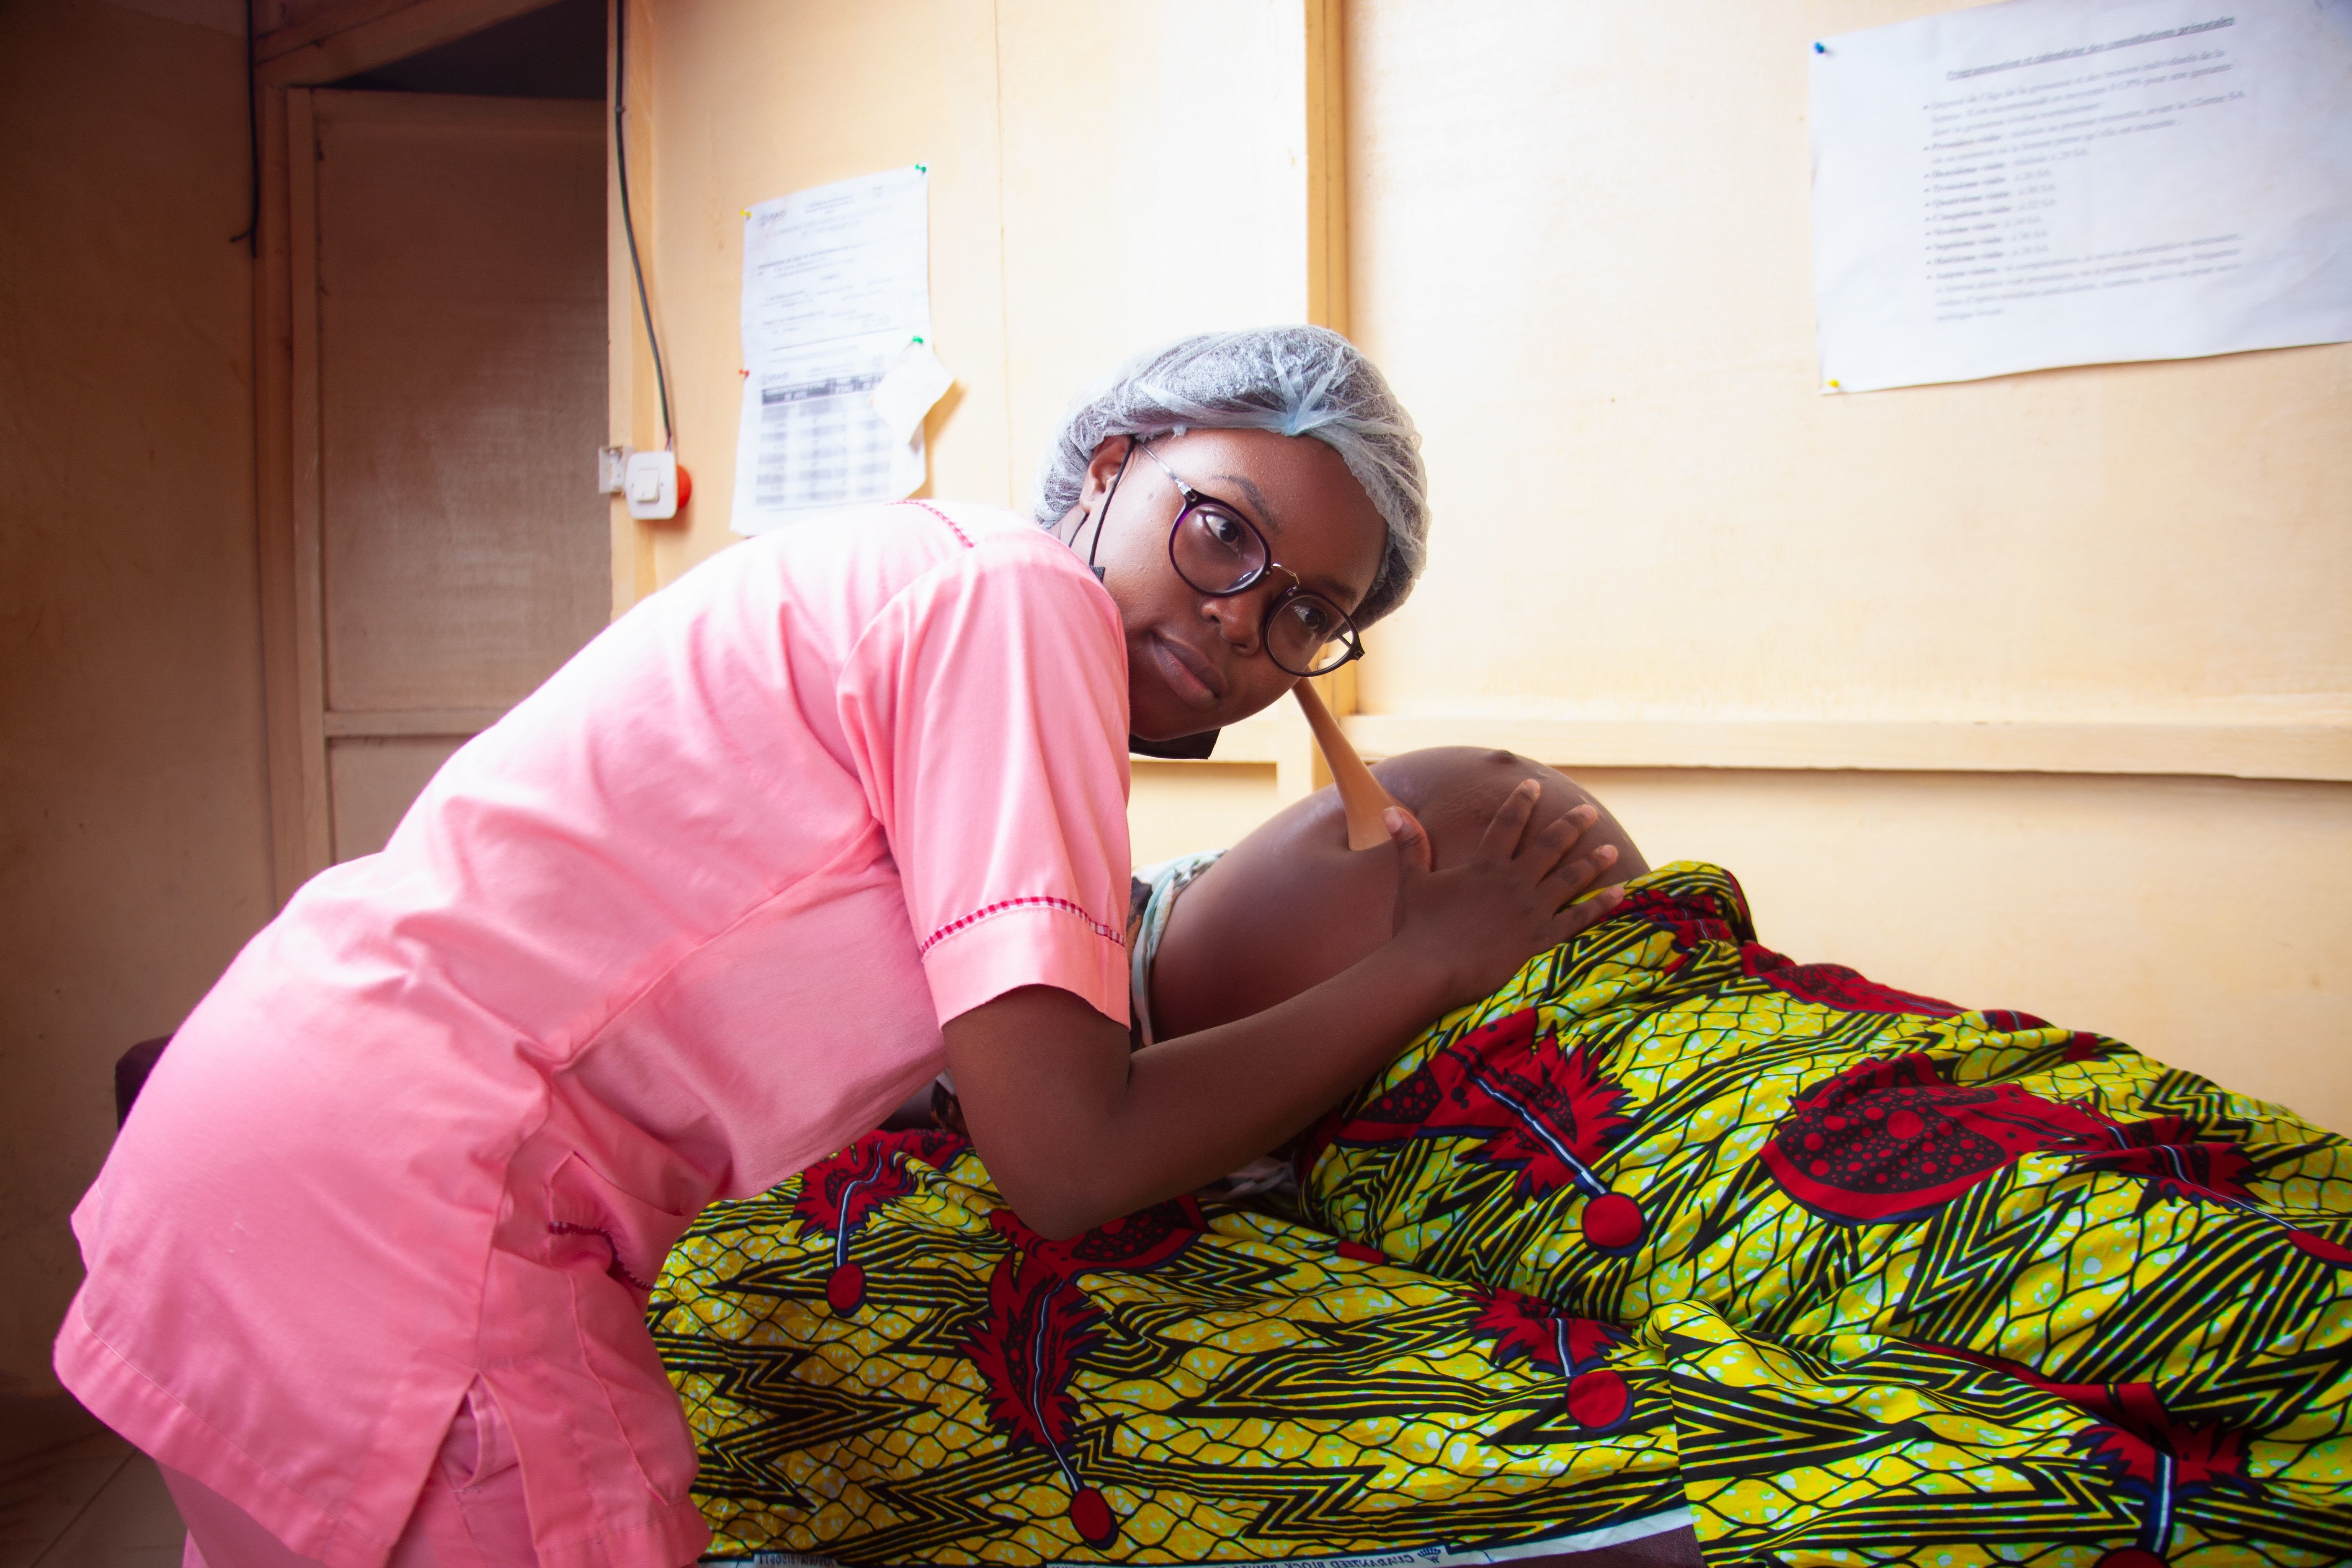 Midwives are critical in reducing deaths and improving maternal health worldwide.